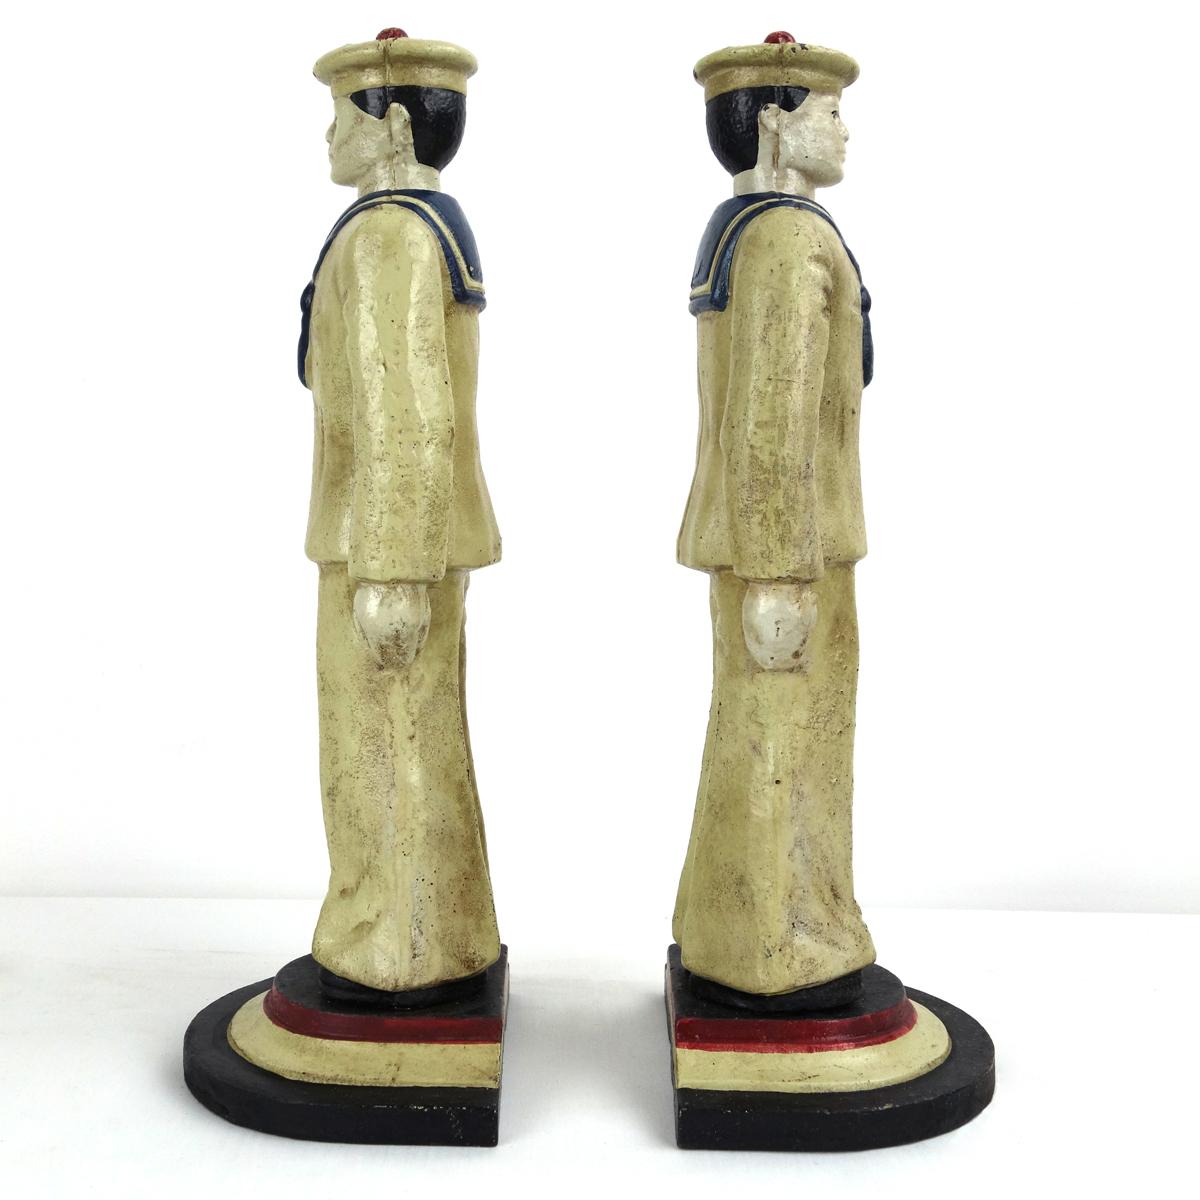 These two masculine and muscular sailors make sure that your book collection stays in an upright position. 
The guys are made of cast iron making them pretty heavy. 
They once were painted in the colors red, white, blue and black. 
We figure that